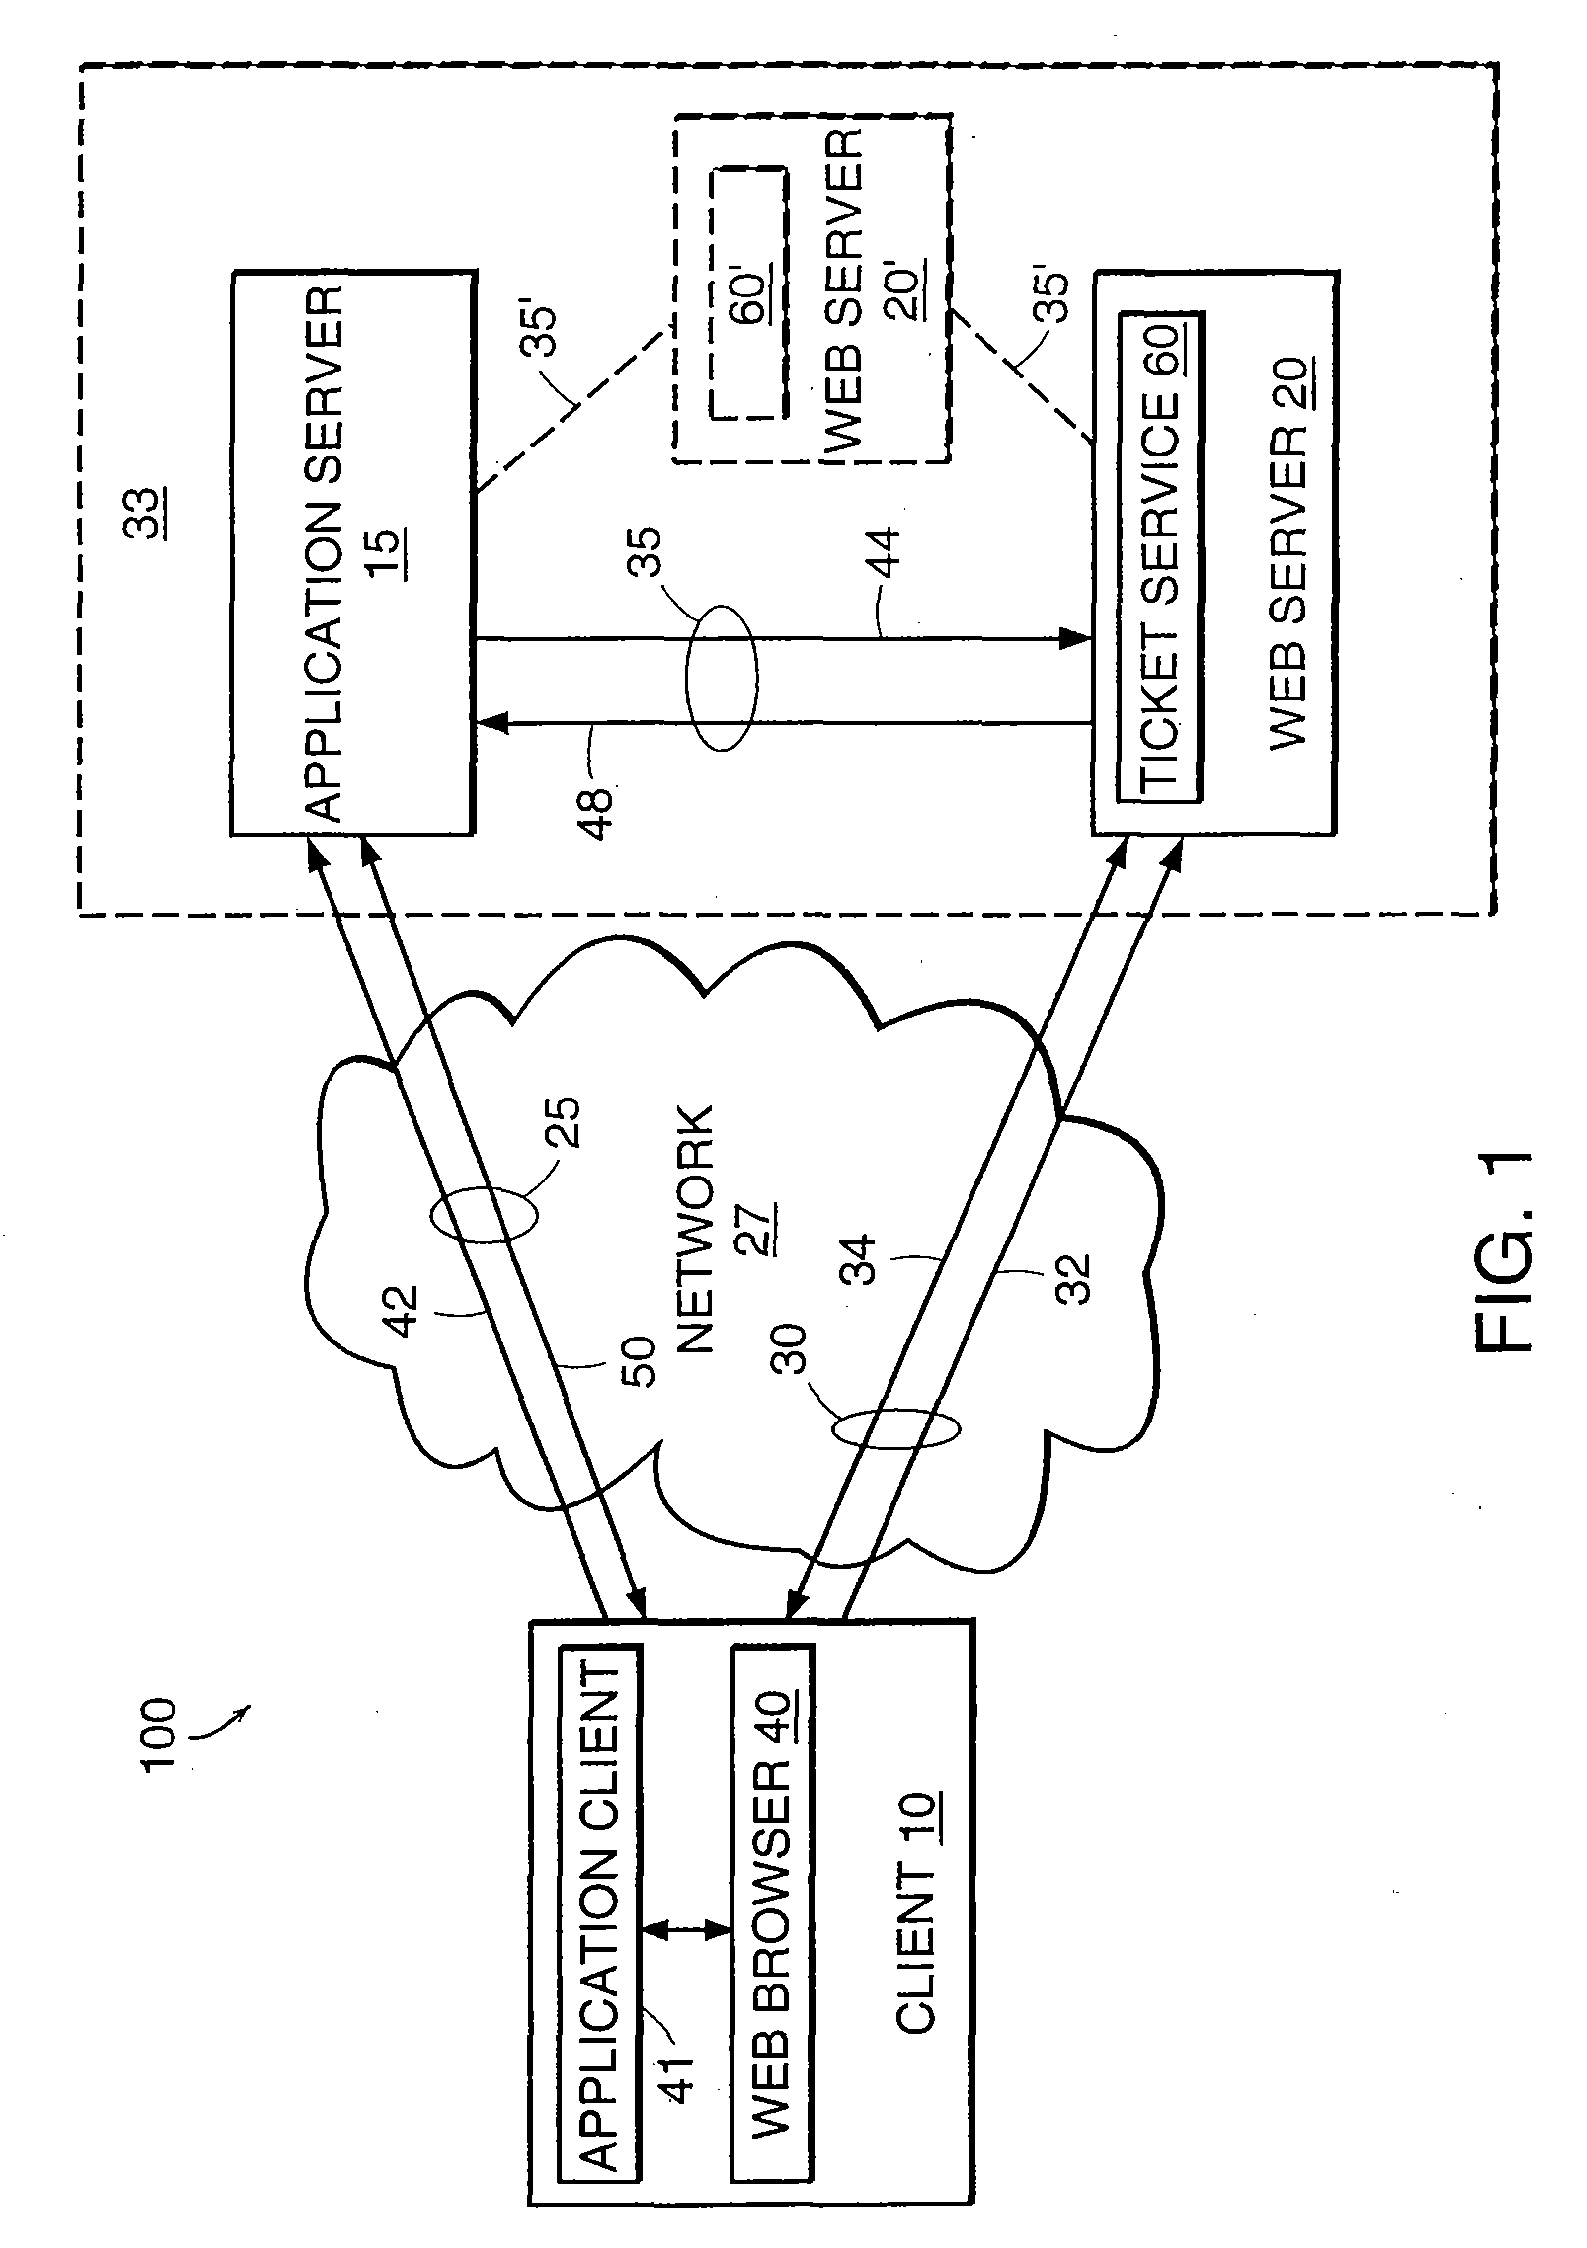 A system and method of exploiting the security of a secure communication channel to secure a non-secure communication channel